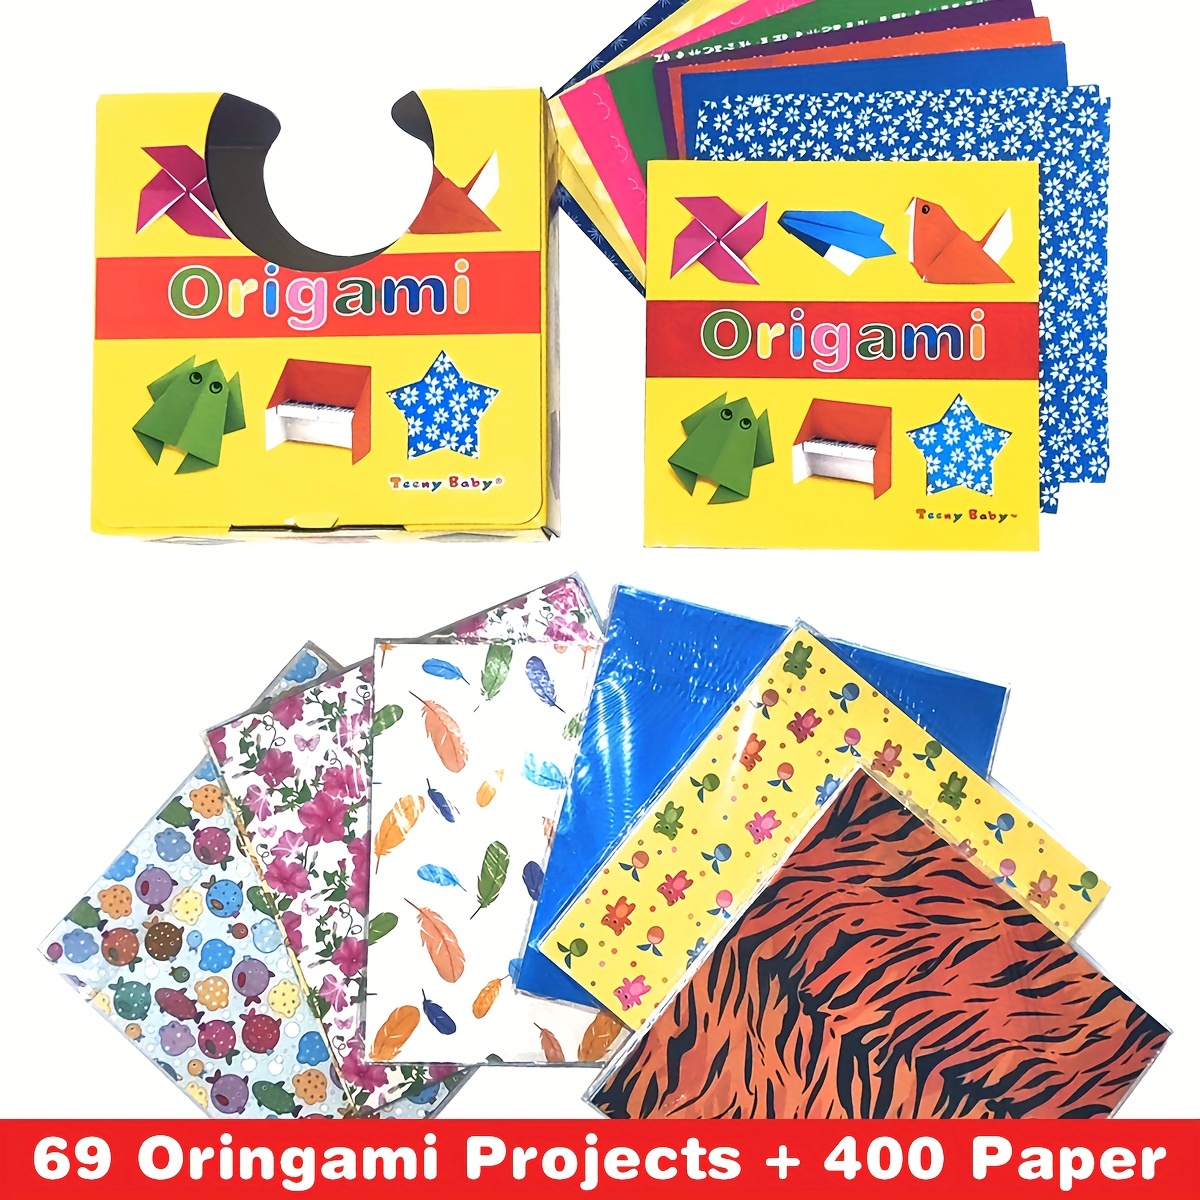 152 Sheets 3D Kids Origami Cartoon Animal Book Folding Paper for